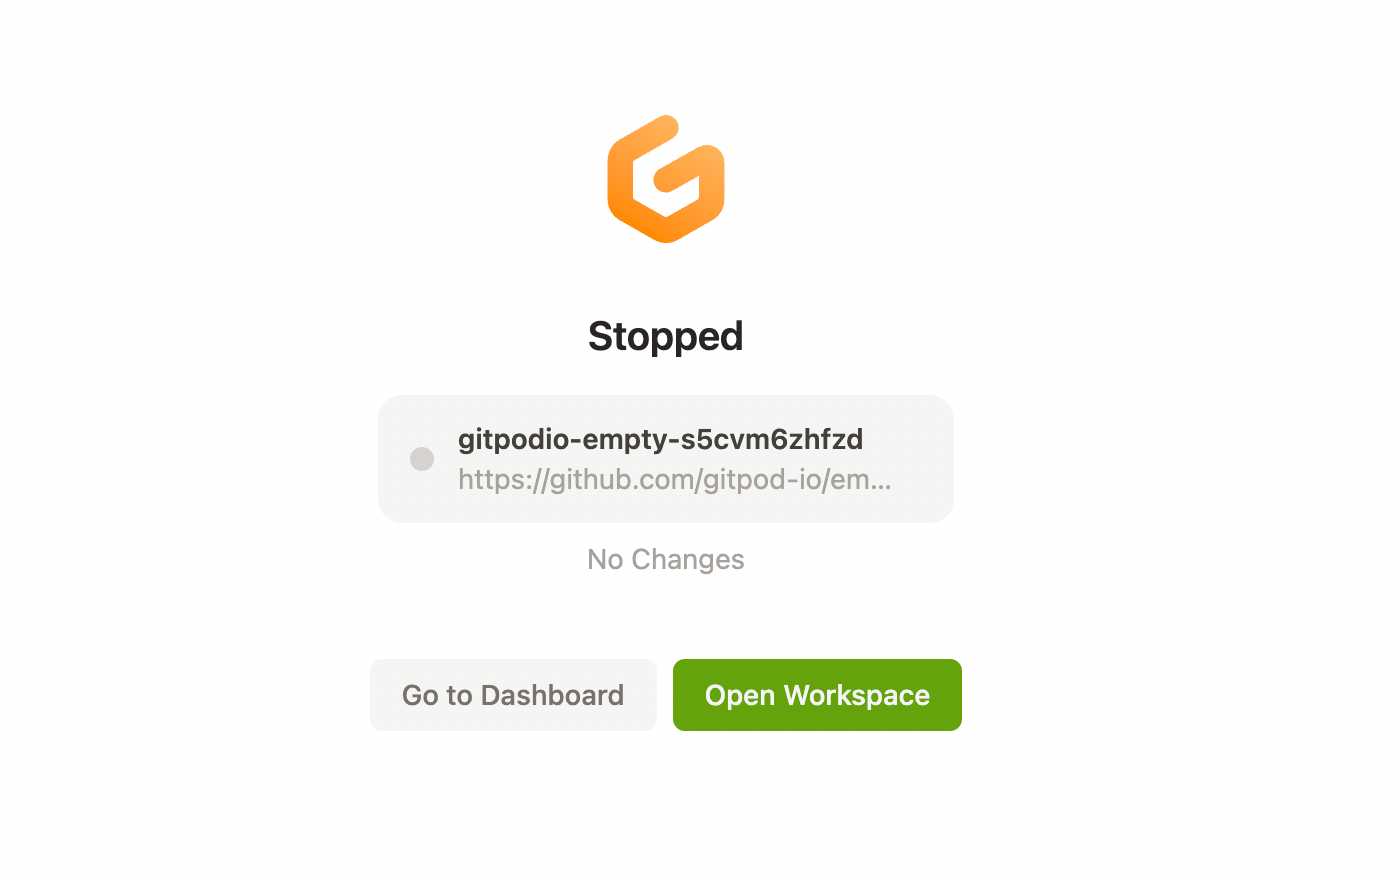 Open workspace button shown on a stopped workspace page